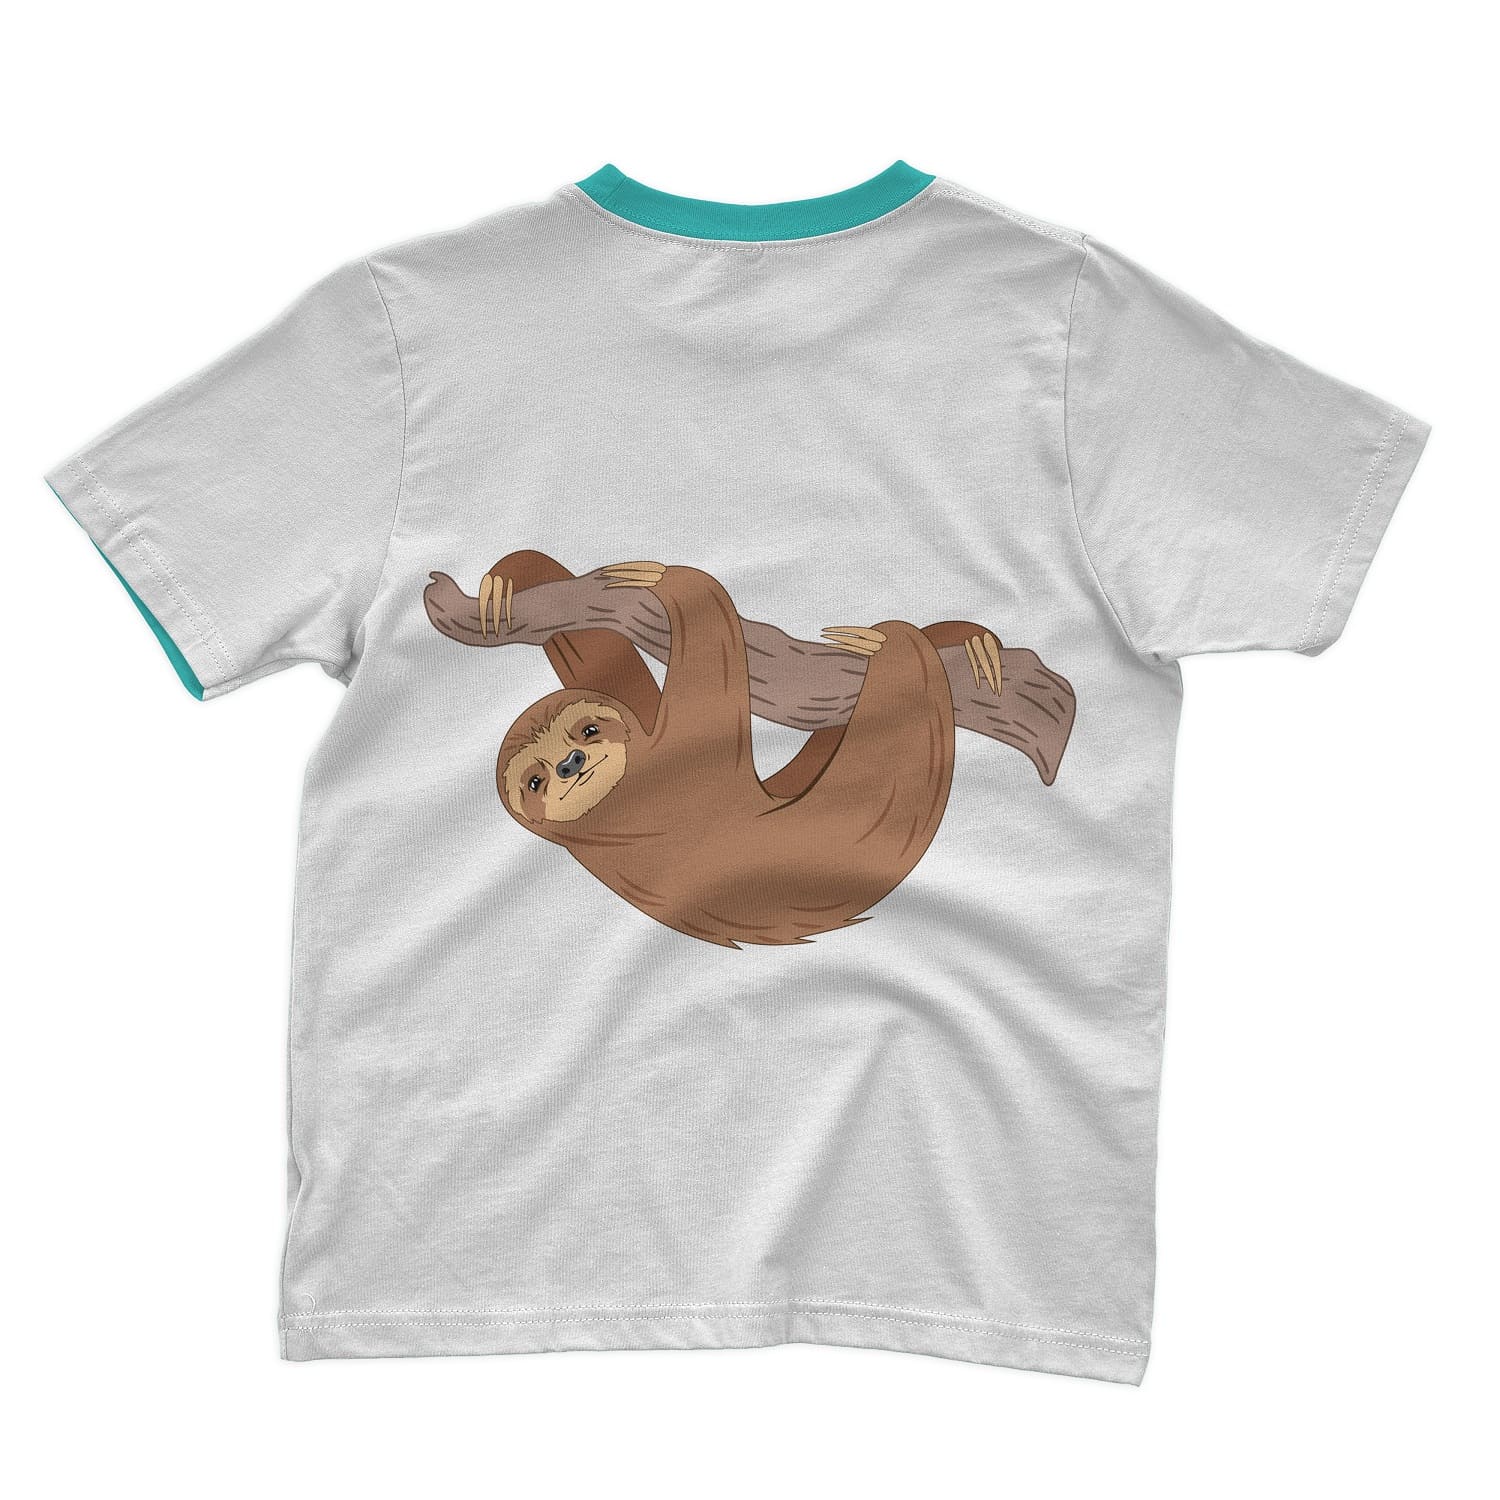 The gray T-shirt depicts a sloth hugging a wooden branch.